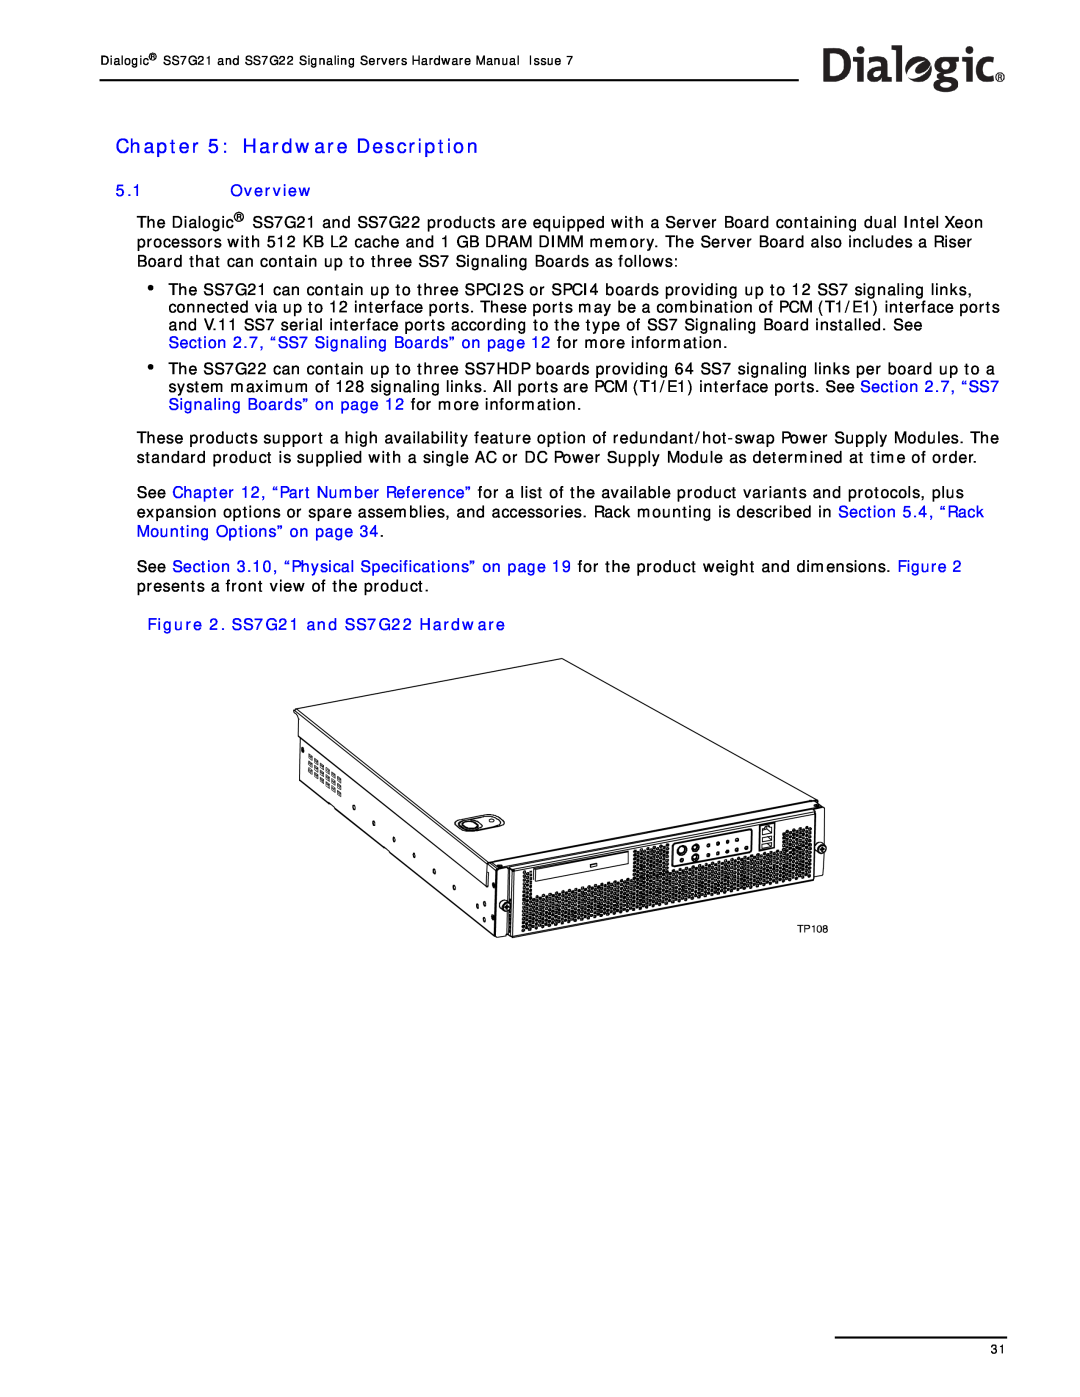 Dialogic manual Hardware Description, Overview, SS7G21 and SS7G22 Hardware 